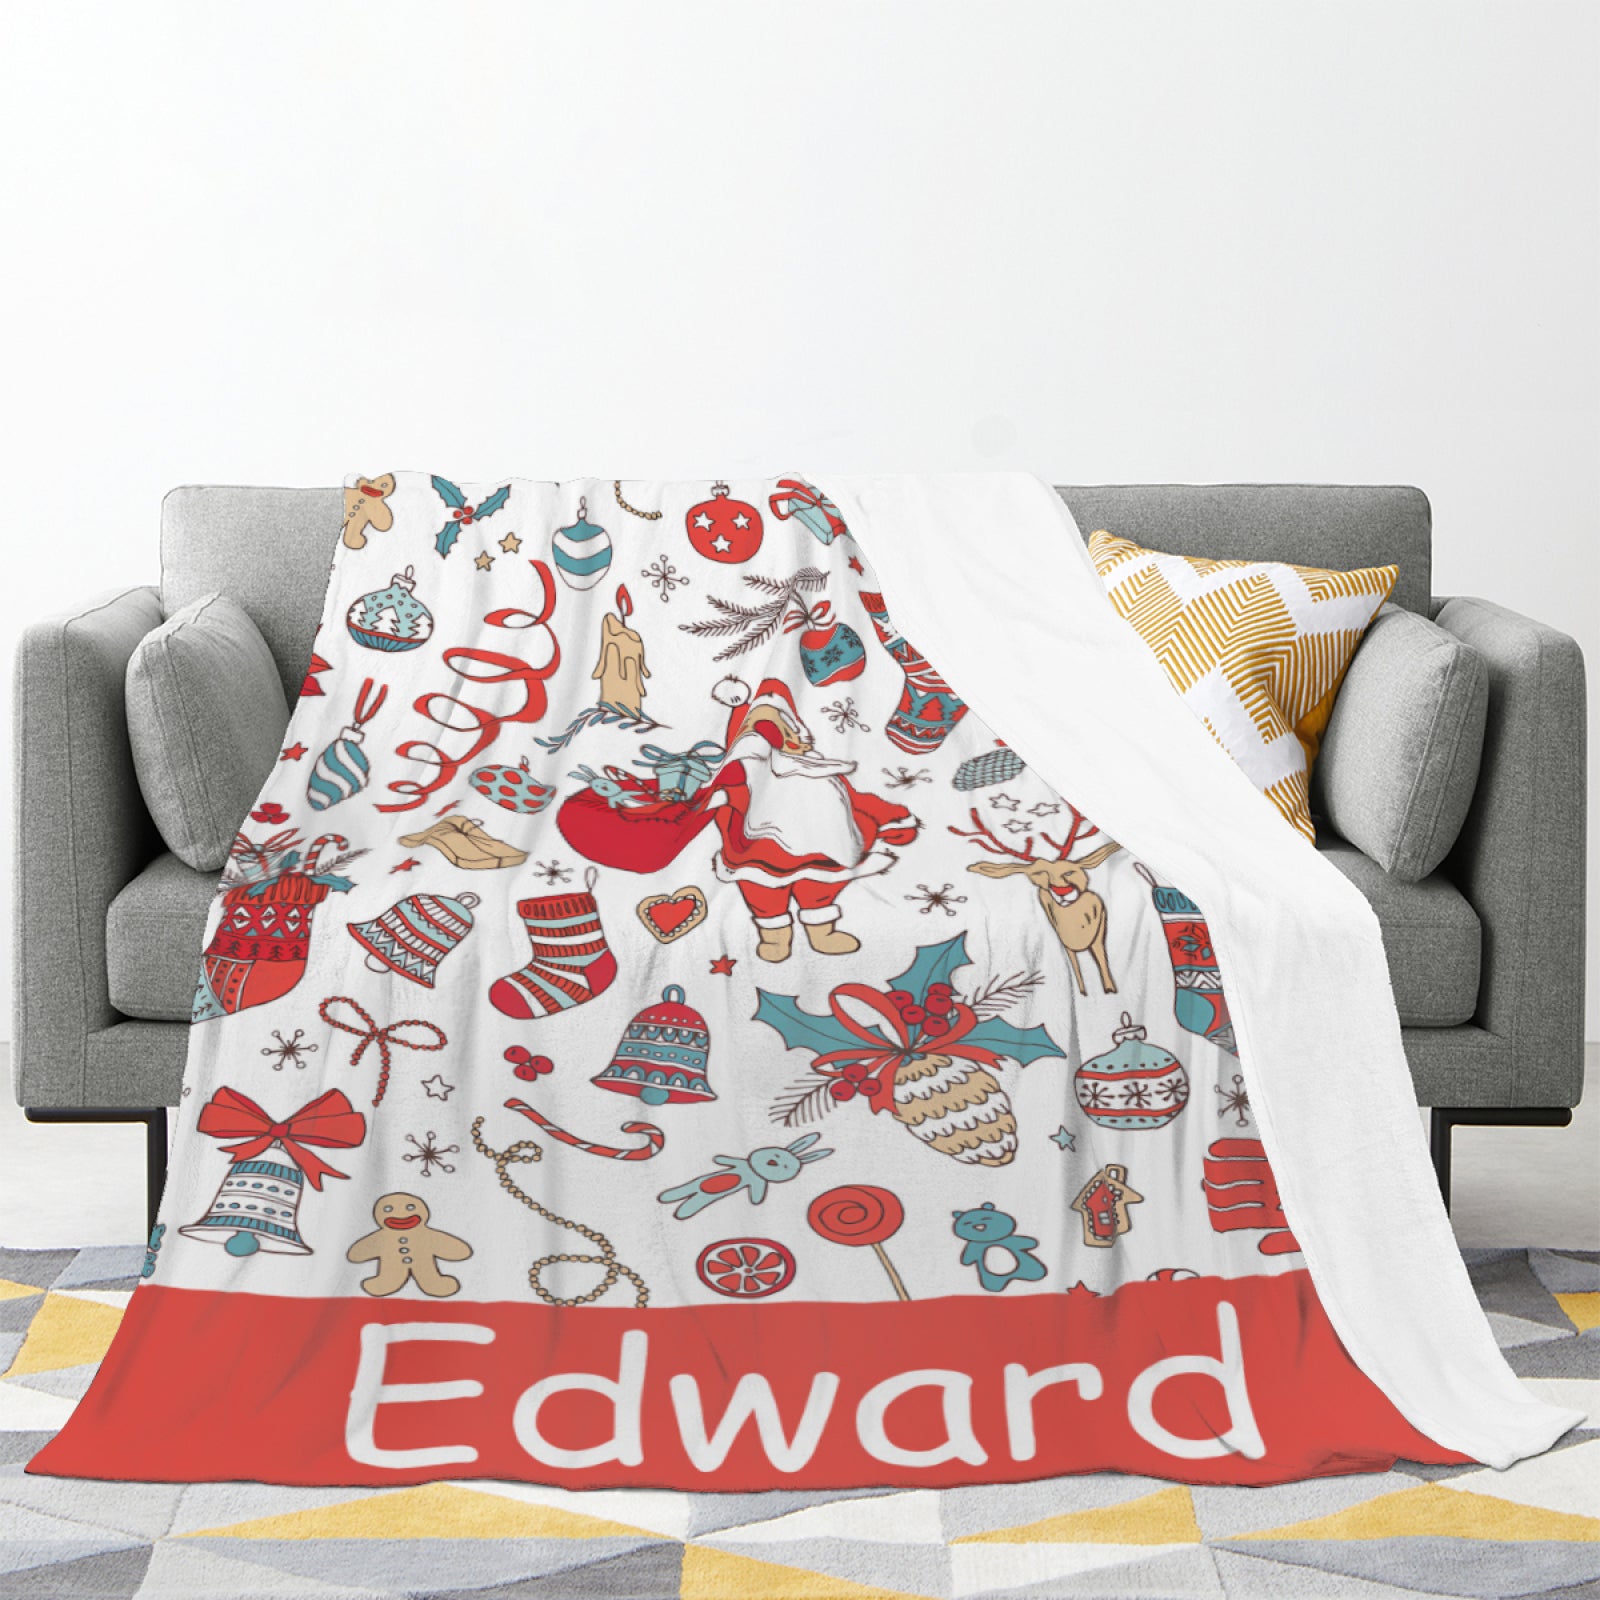 Custom Personalized Name Blankets, Christmas Baby Blankets, Holiday Blankets